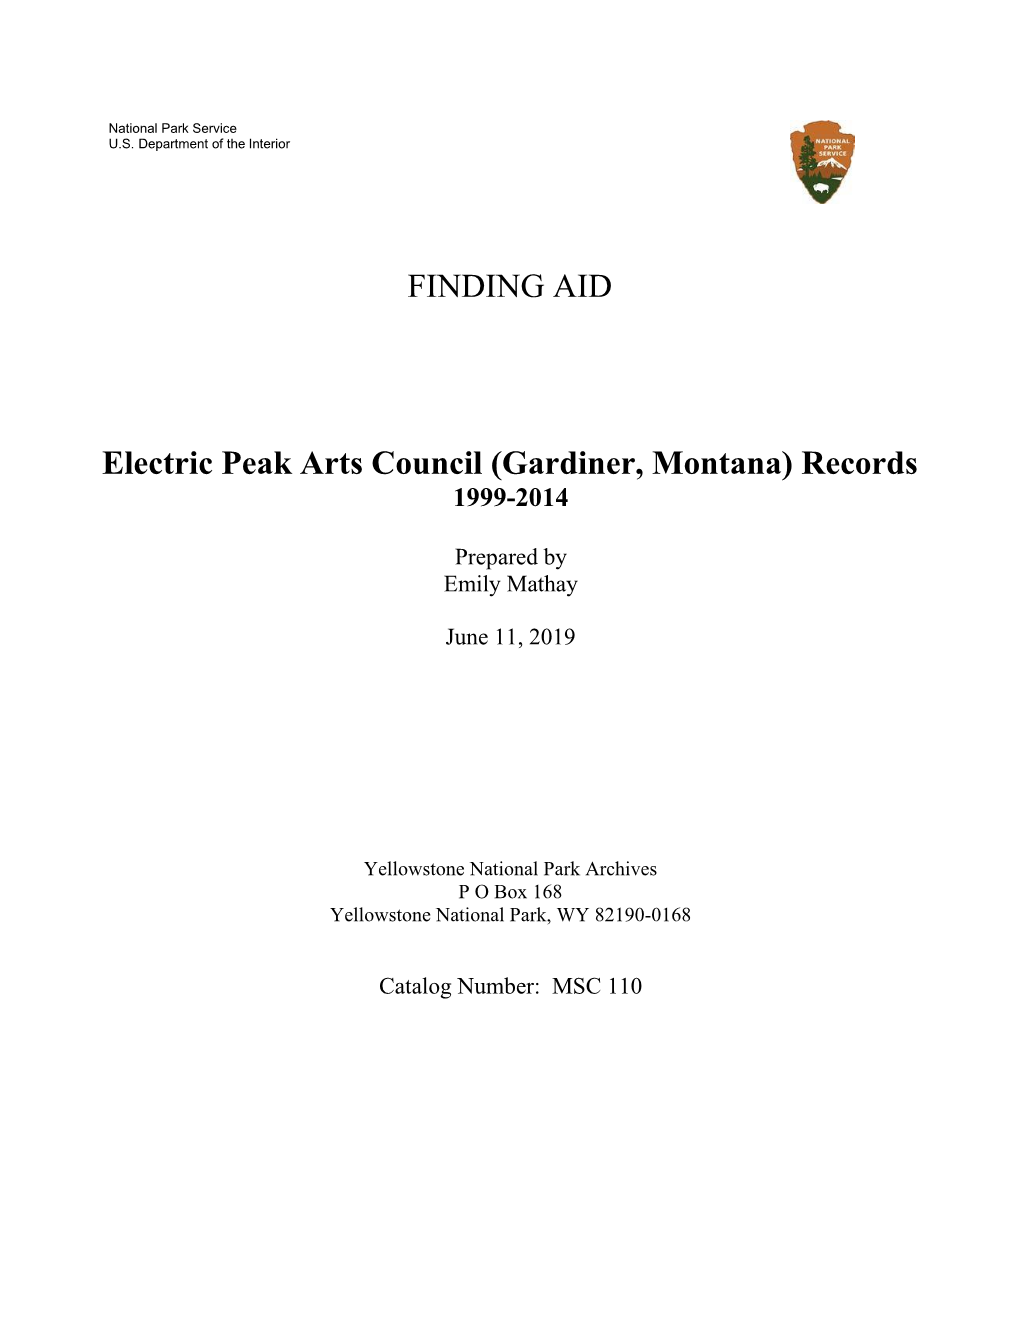 FINDING AID Electric Peak Arts Council (Gardiner, Montana) Records